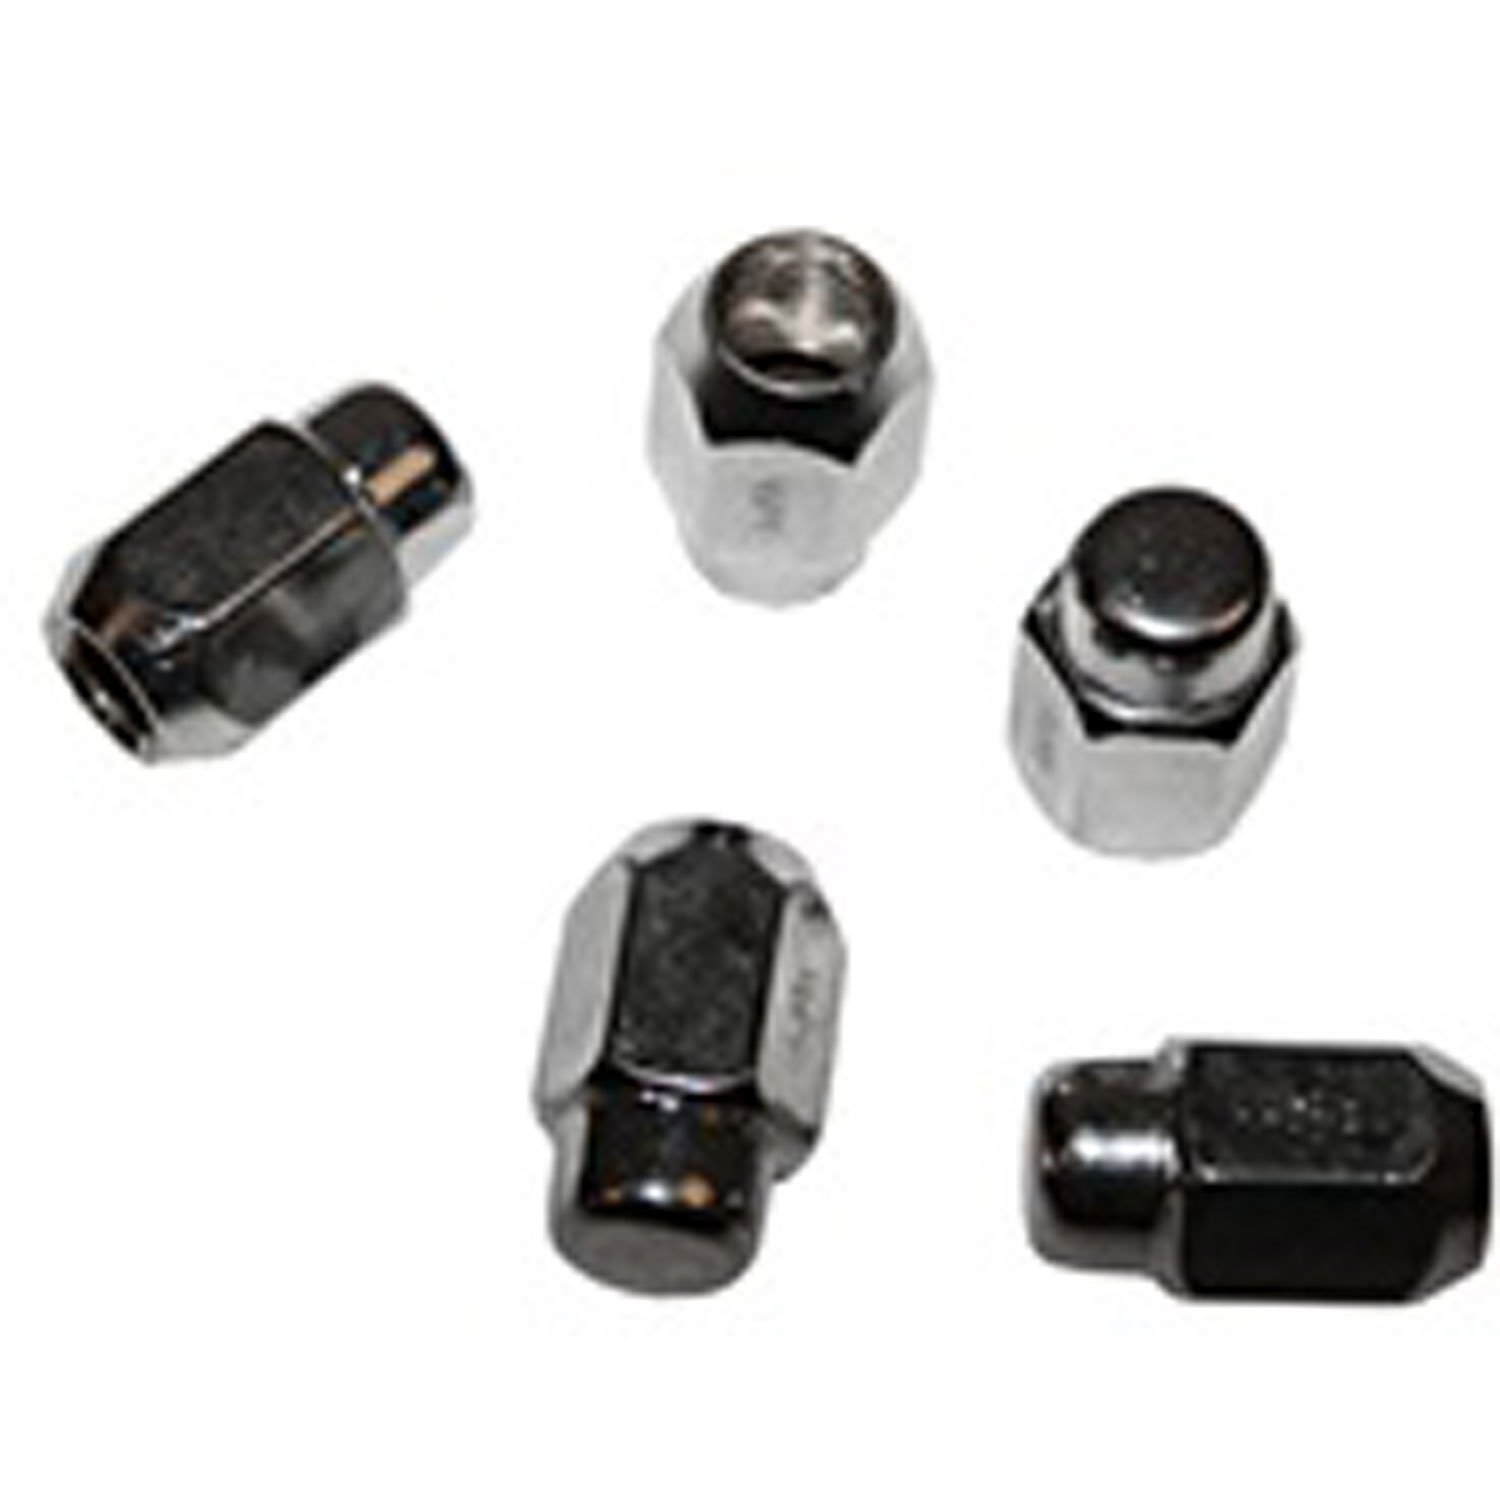 This original-style chrome lug nut from Omix-ADA fits 46-86 Jeep CJ models. Sold individually 5 required per wheel.